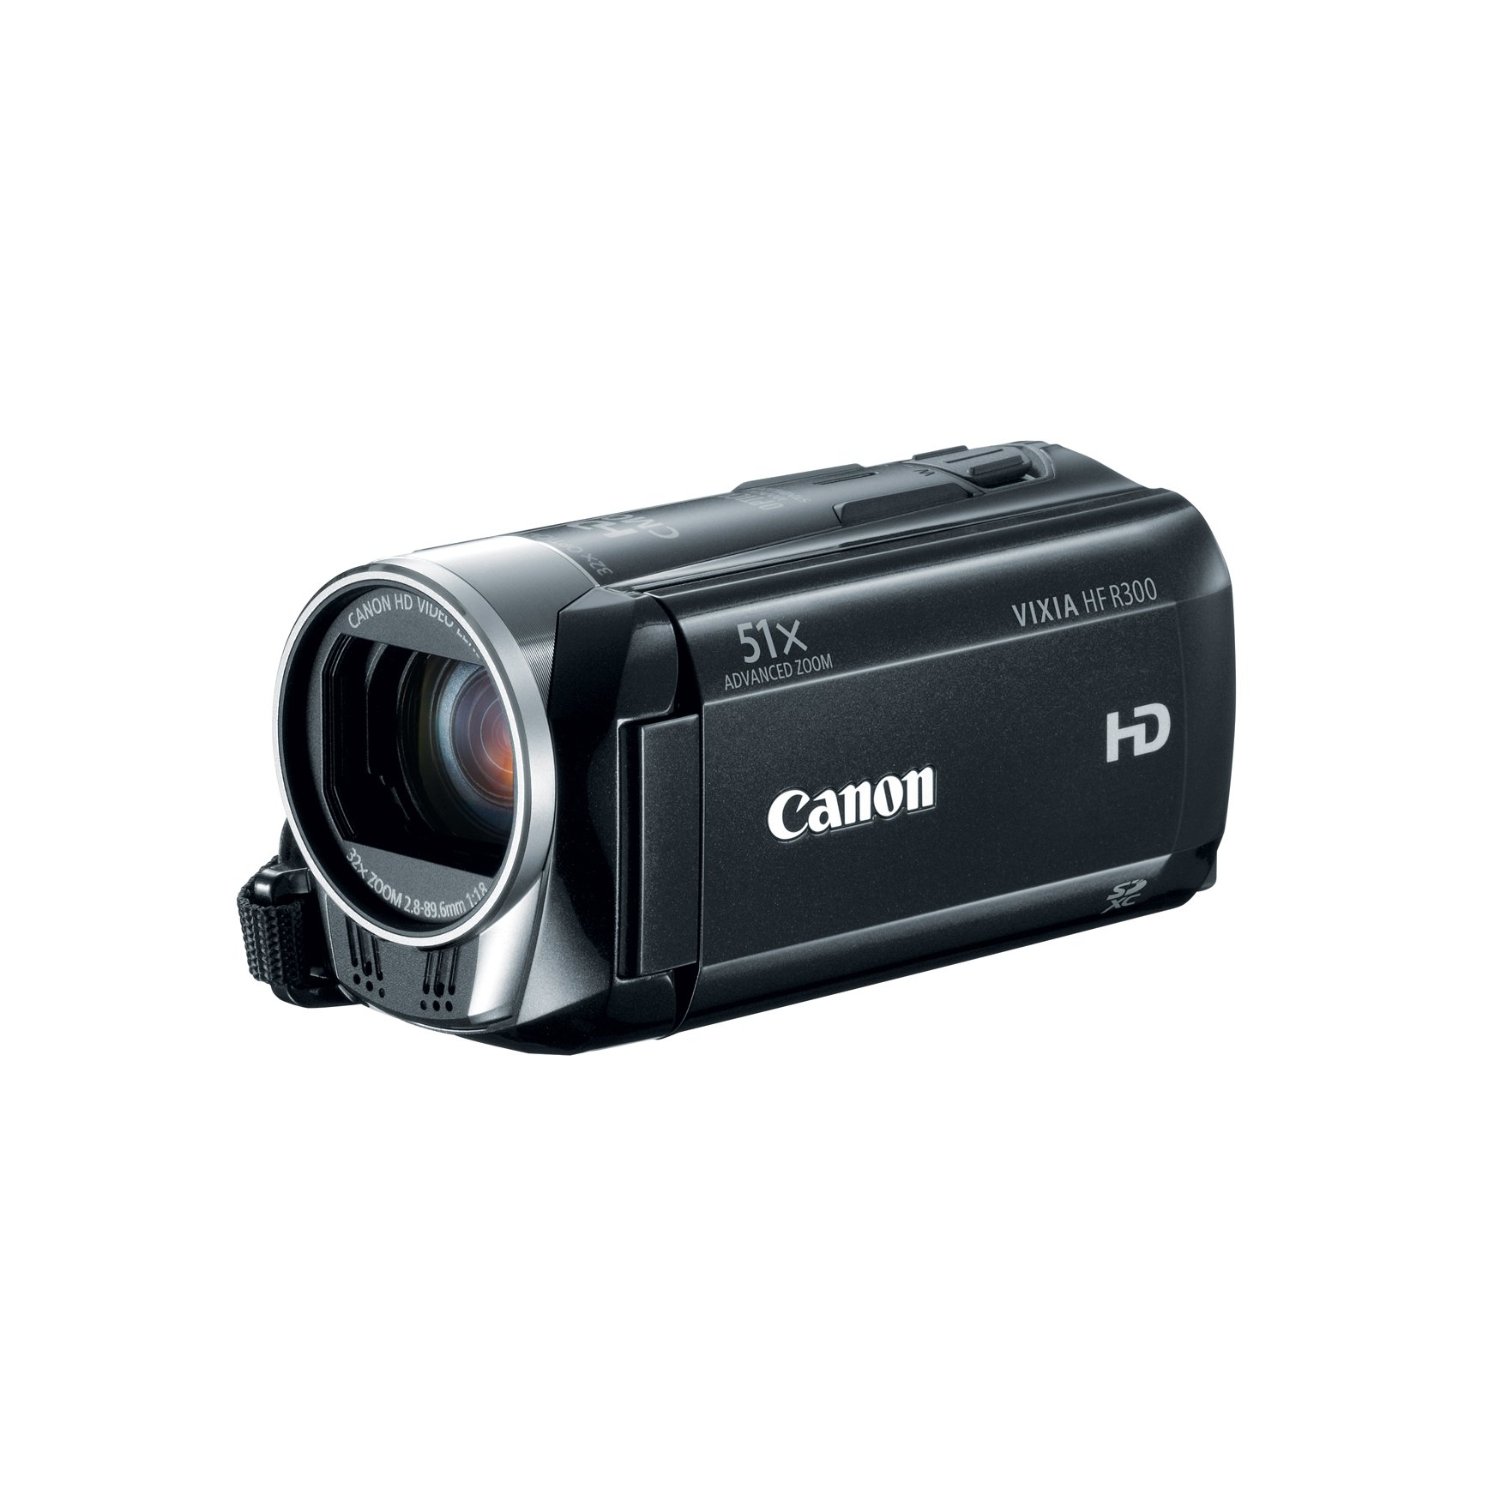 http://thetechjournal.com/wp-content/uploads/images/1202/1328098403-canon-vixia-hf-r300-full-hd-51x-image-stabilized-optical-zoom-camcorder-6.jpg